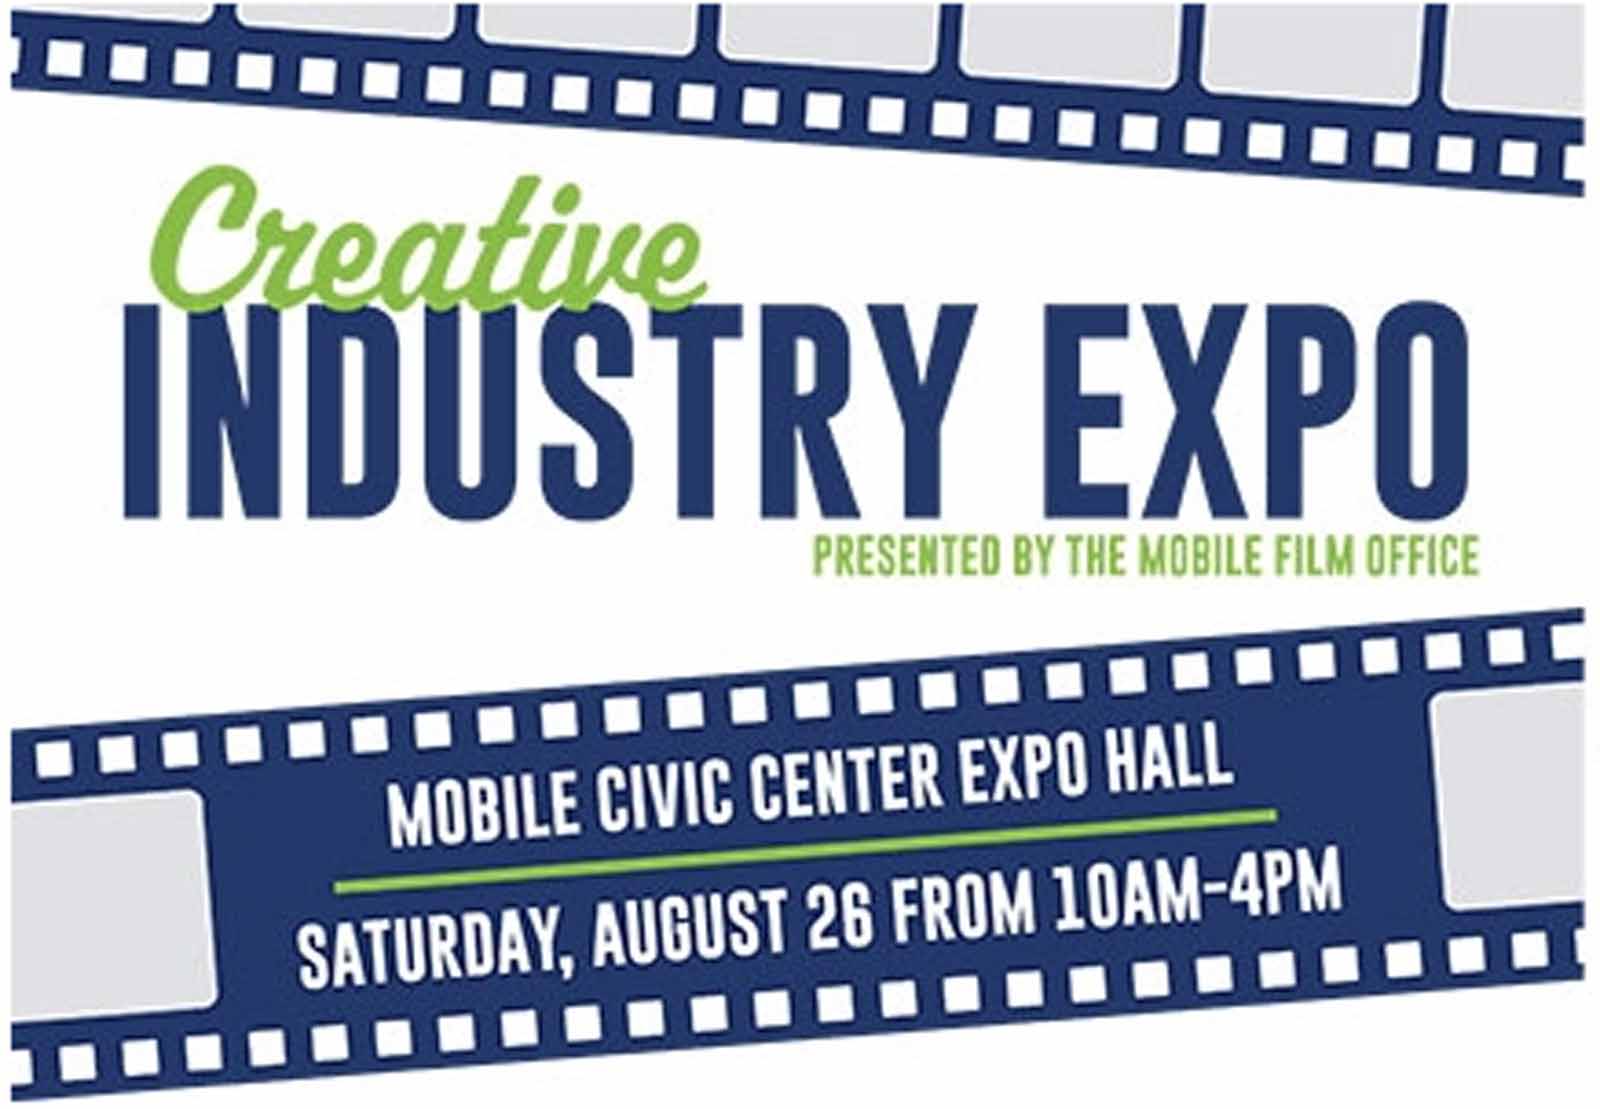 Creative Industry Expo Planned For Mobile